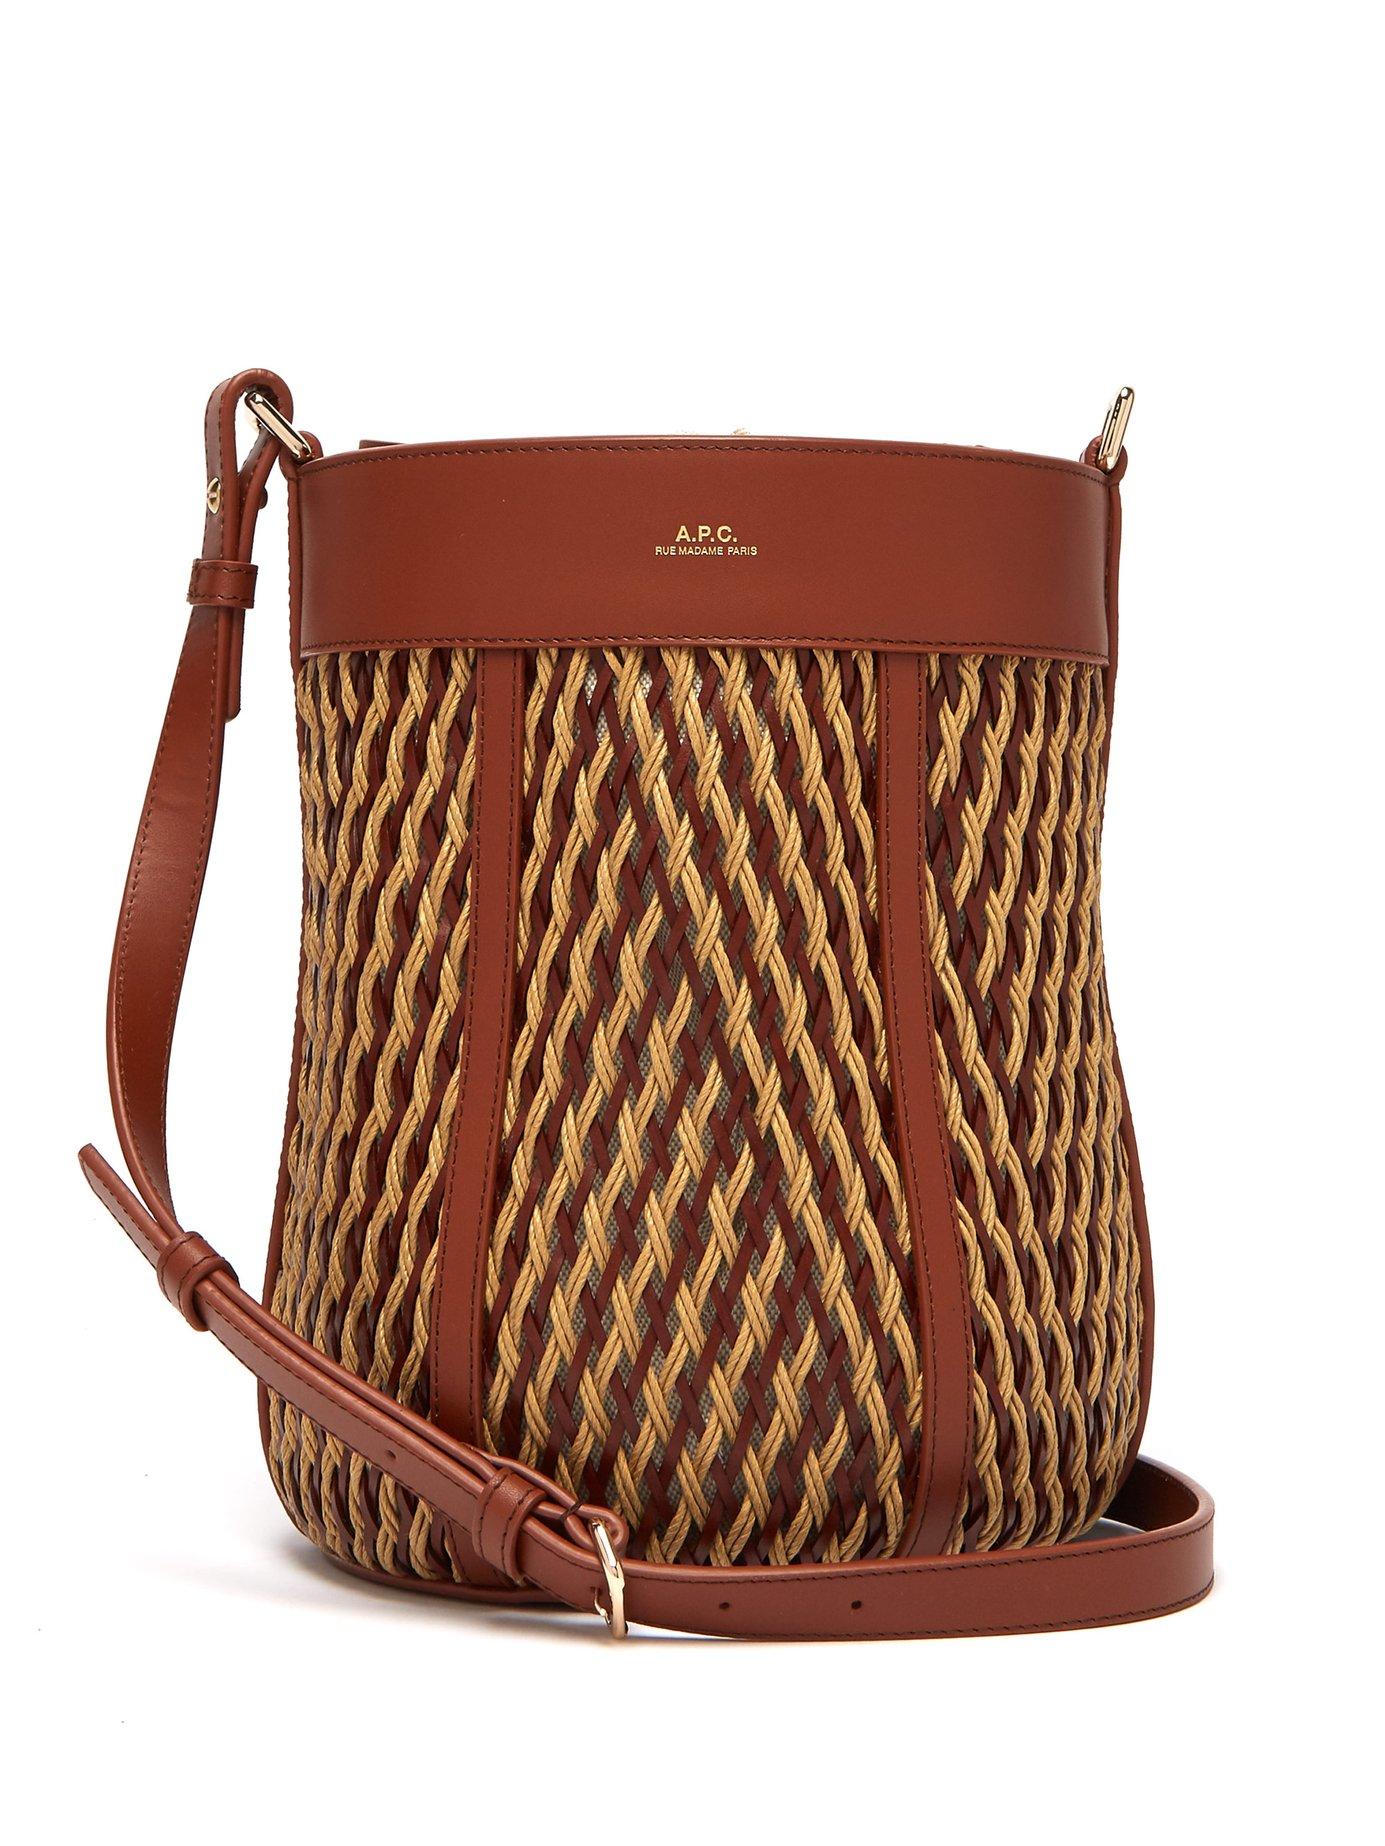 A.P.C. Woven Cross Body Bag in Brown - Lyst